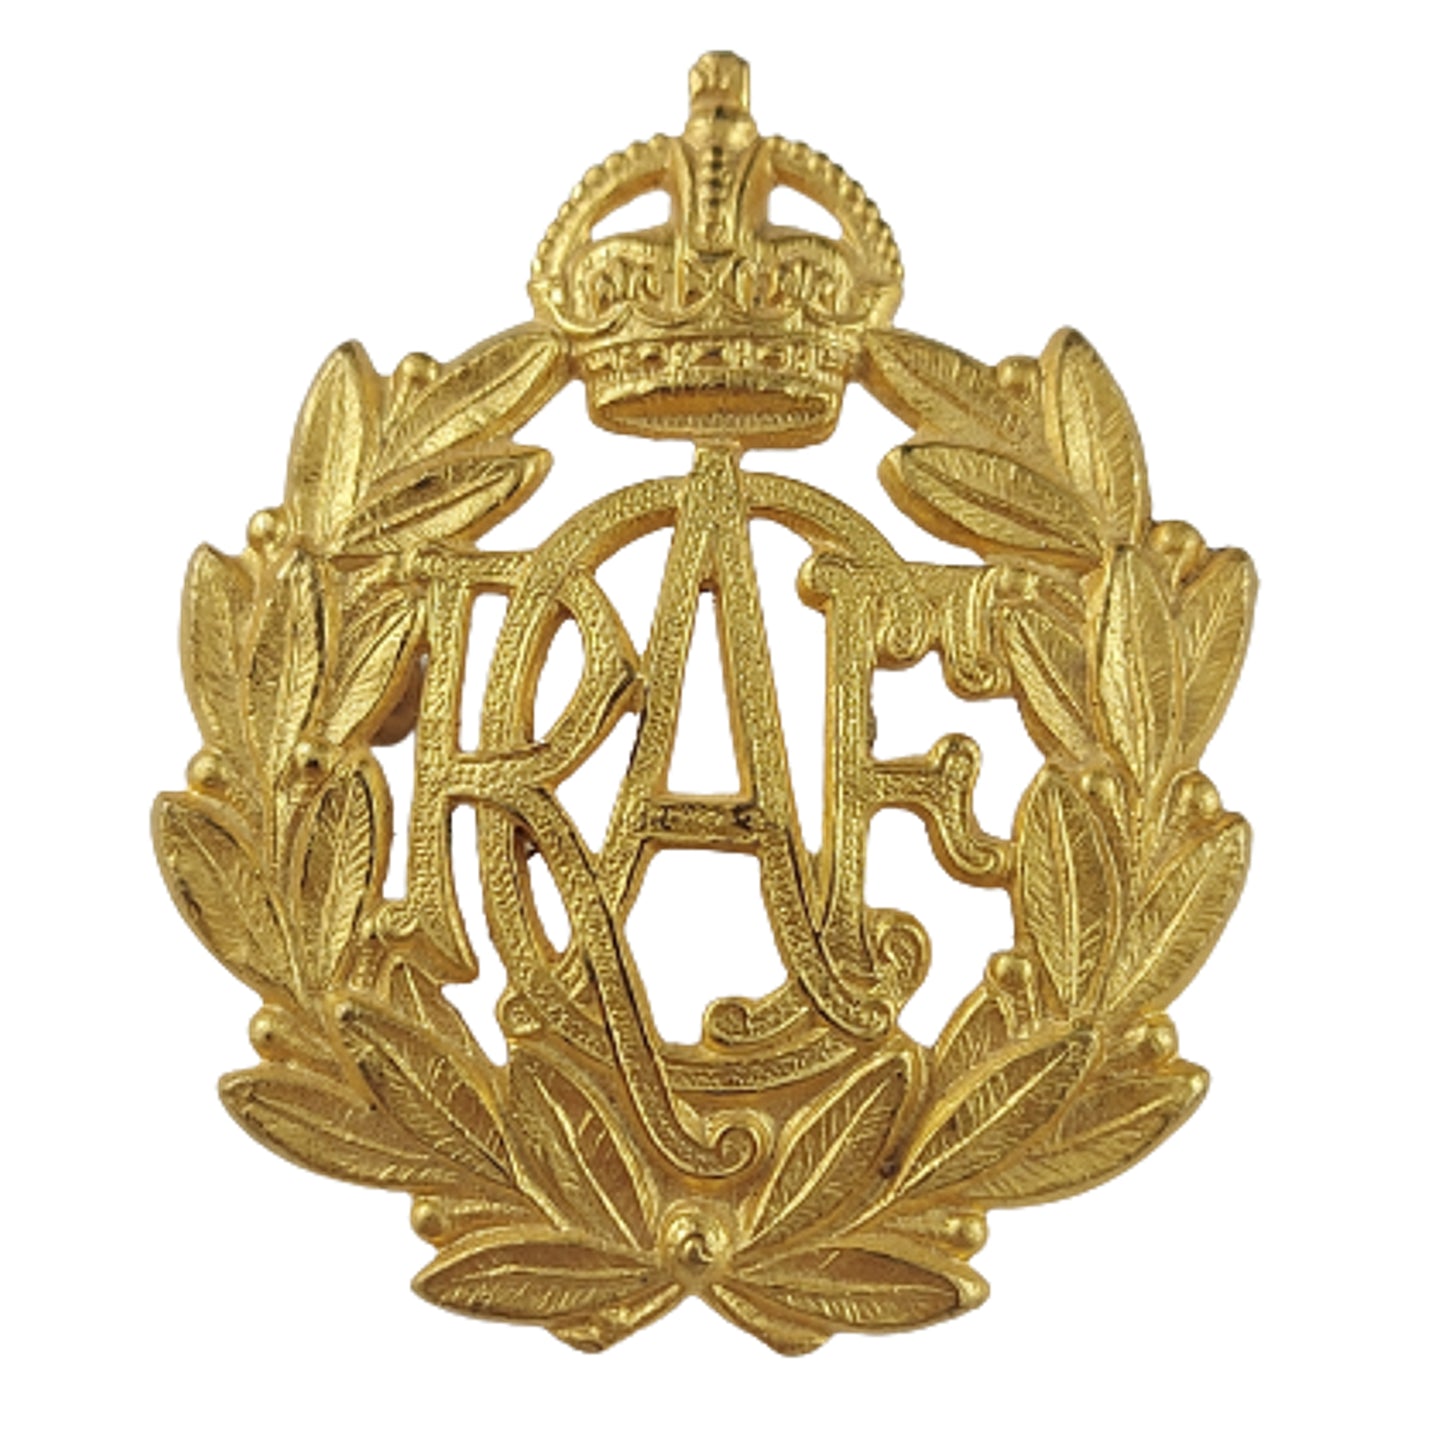 WW2 RCAF Royal Canadian Air Force Officer's Cap Badge - Scully Montreal